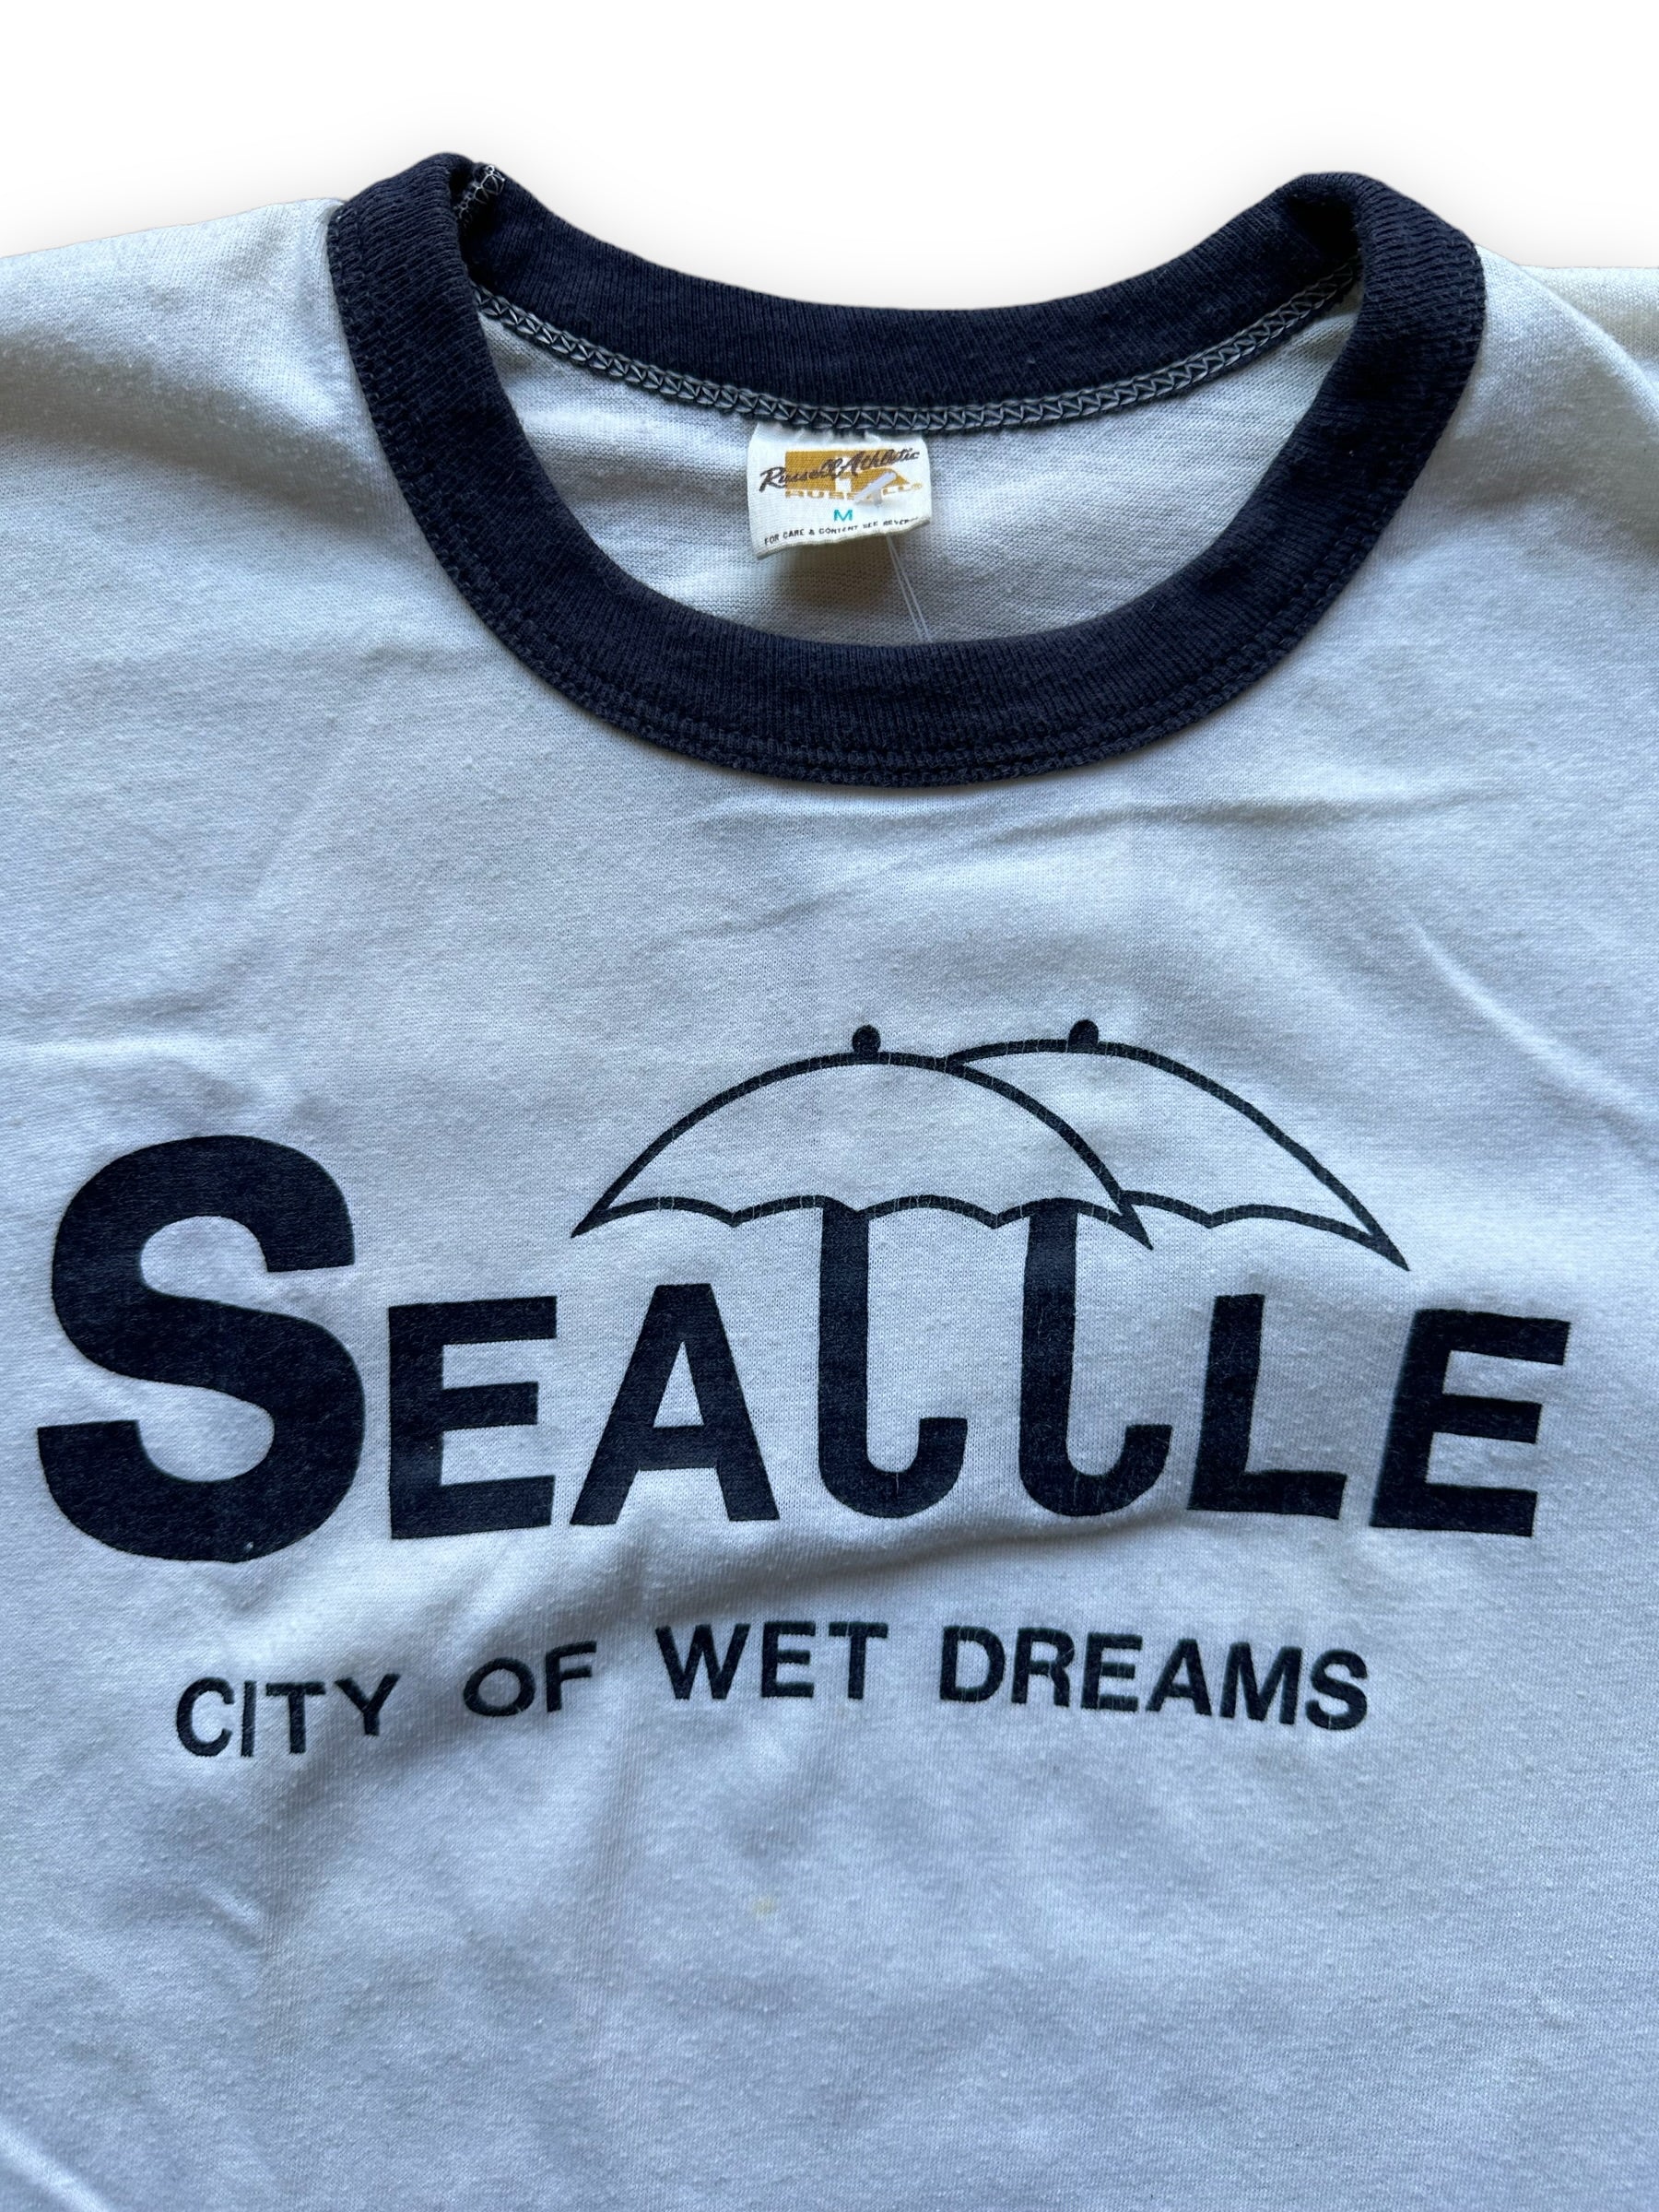 Tag View on Vintage Seattle City of Wet Dreams Ringer Tee SZ M |  Vintage Russell Athletic T Shirt | Barn Owl Vintage Seattle